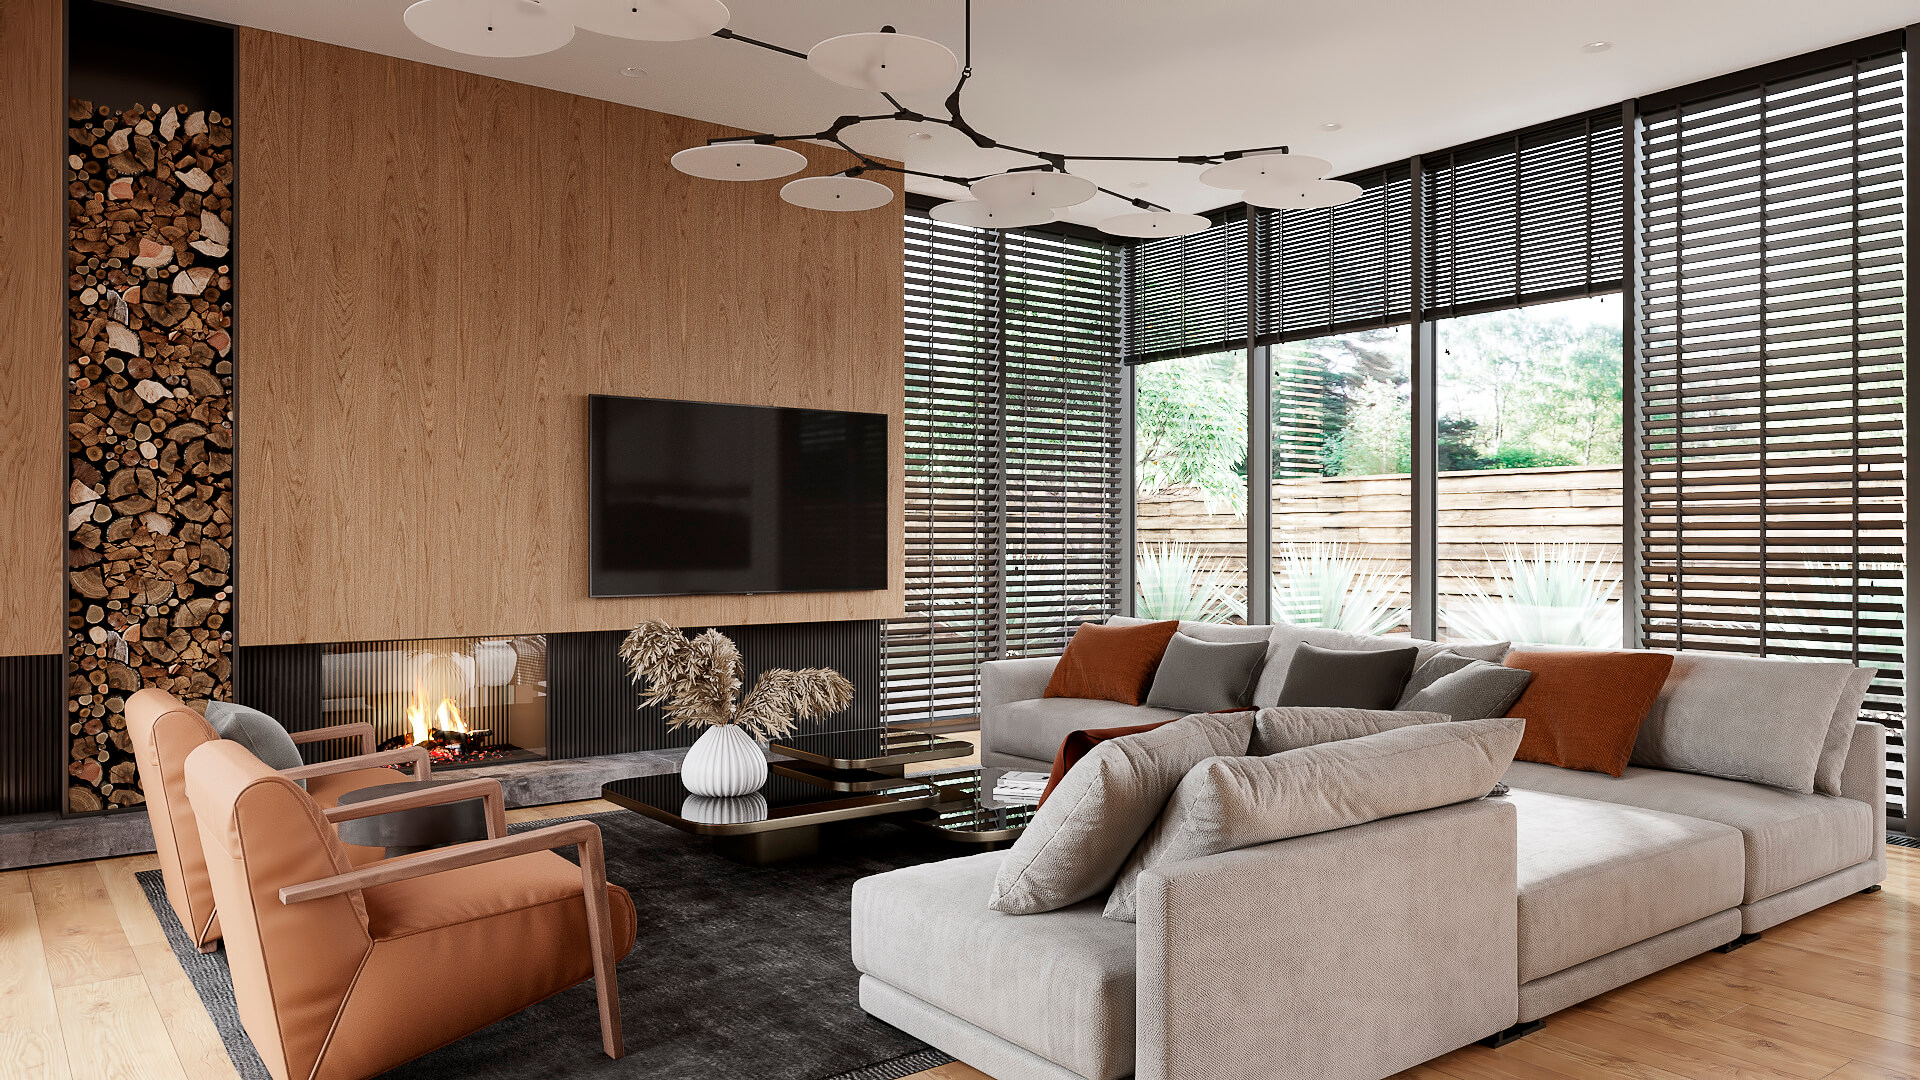 Photorealistic 3D Render of a Modern Residential Interior